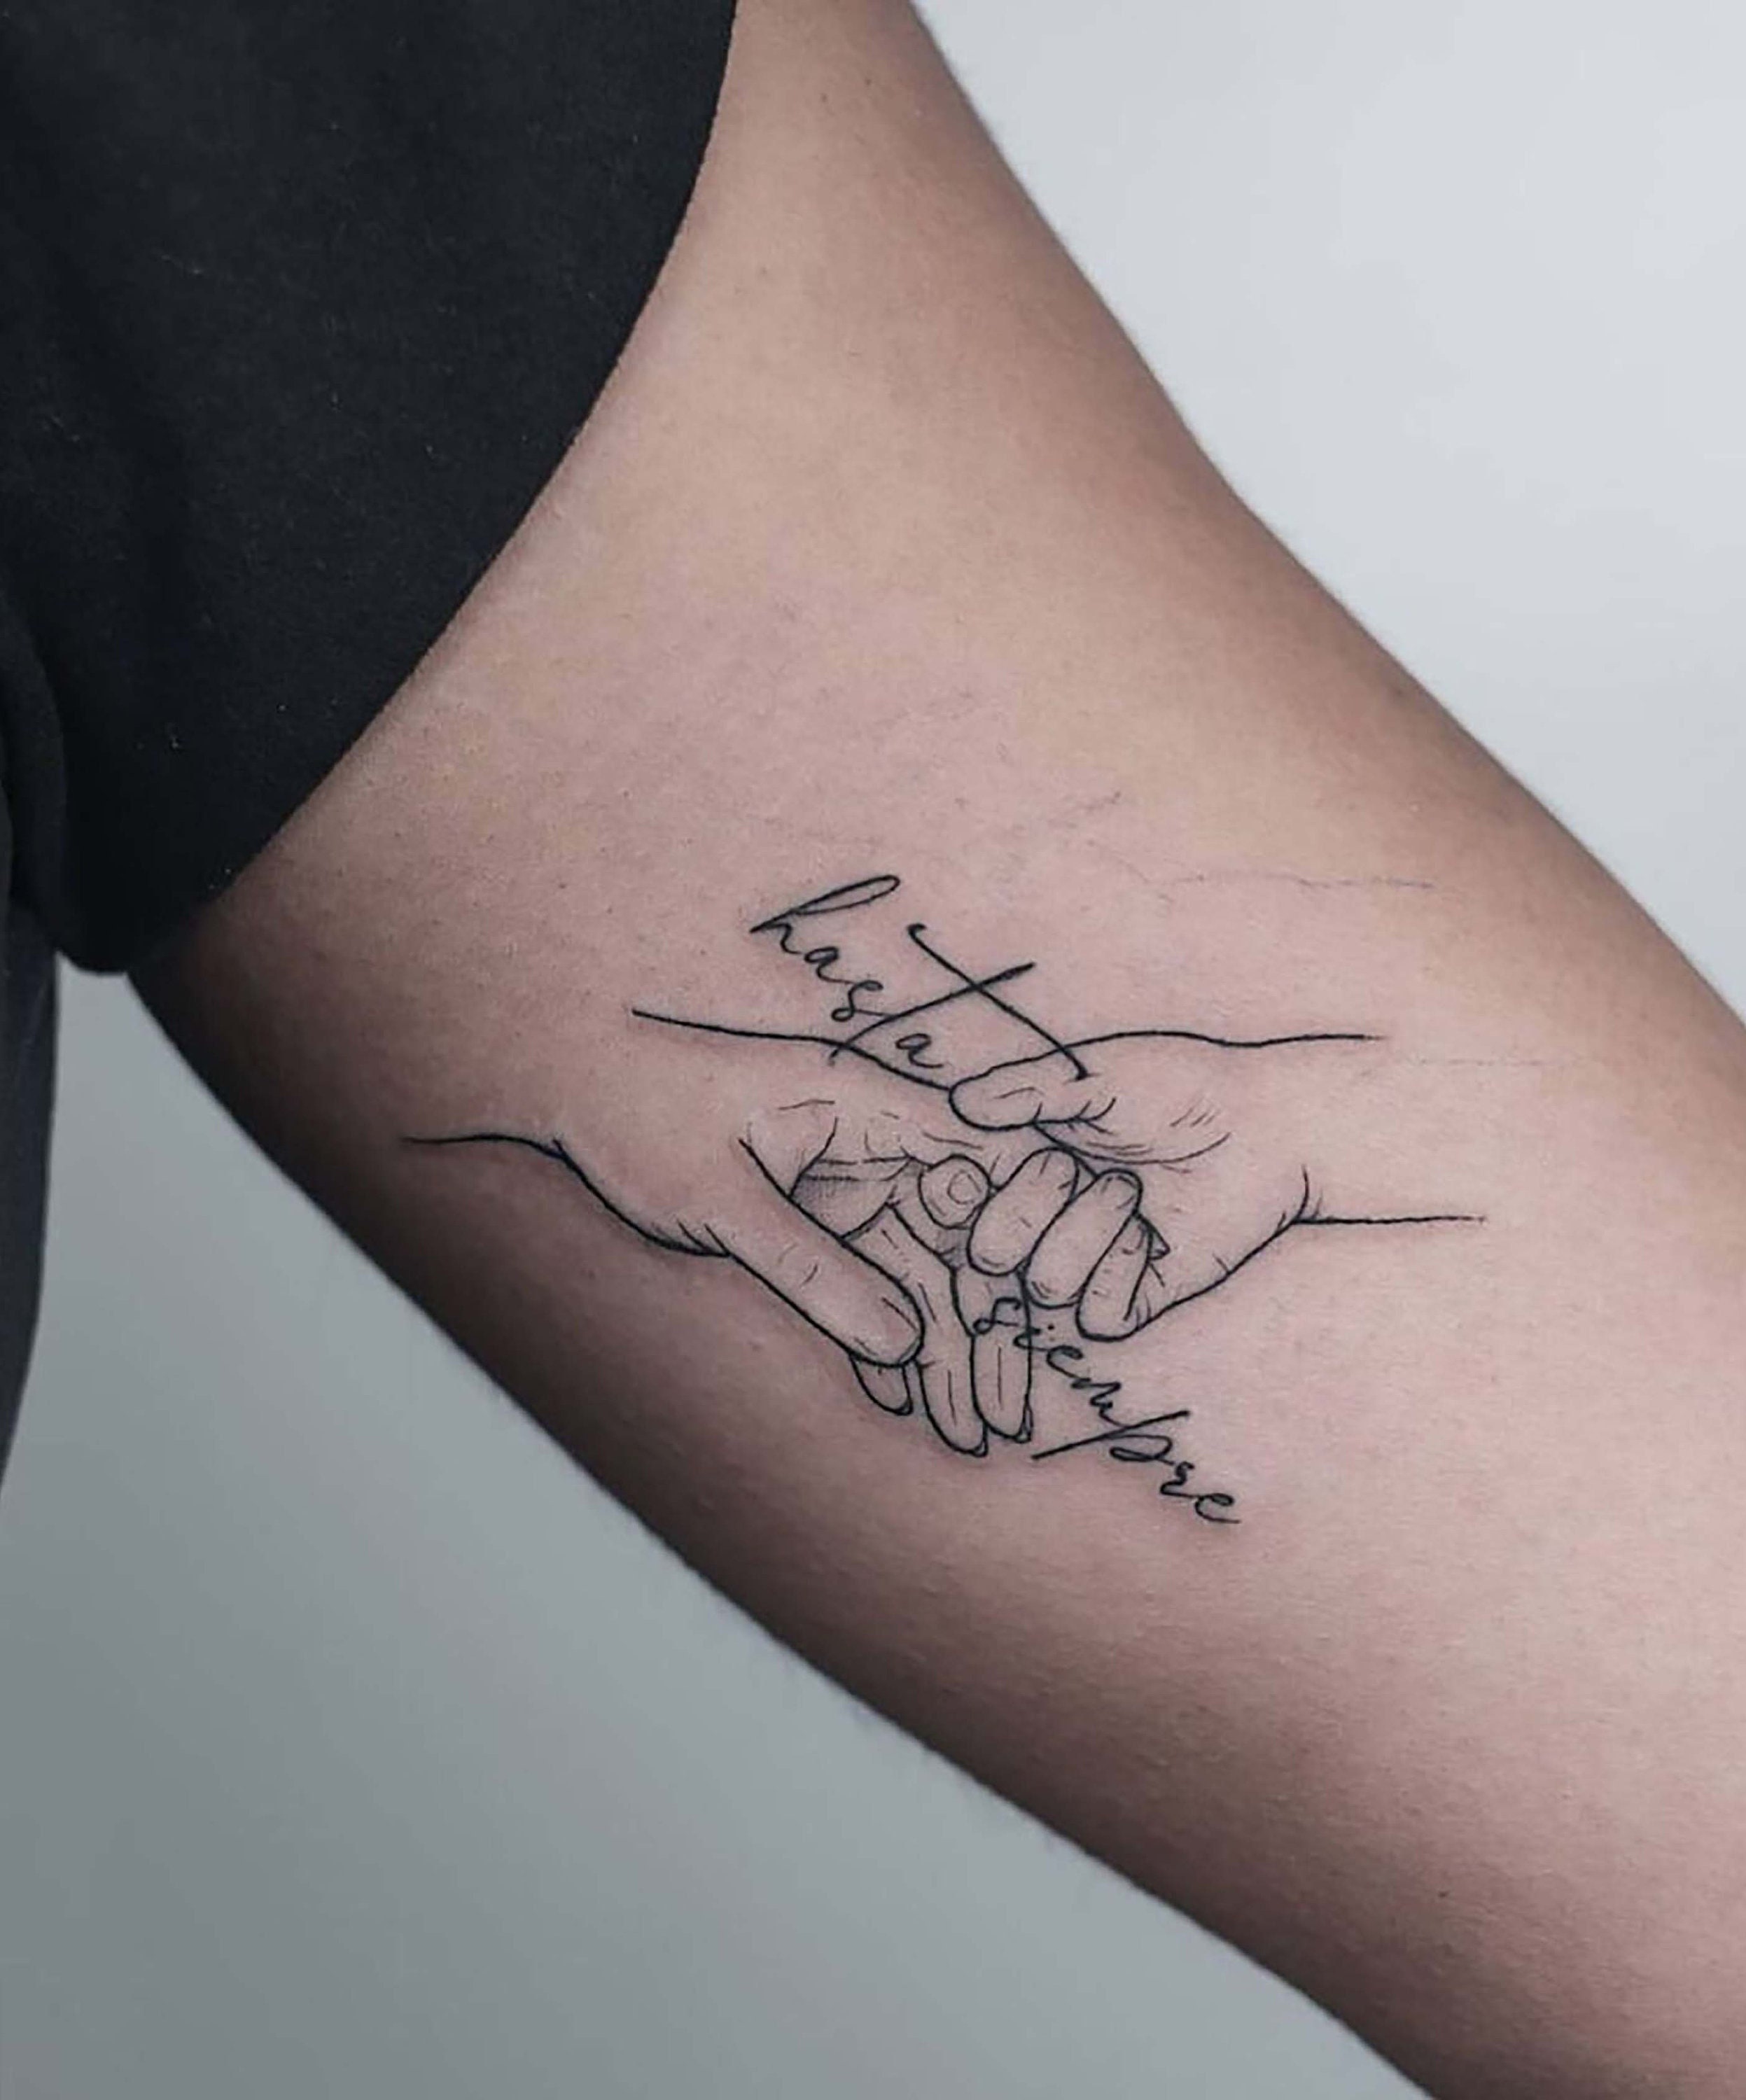 10 Cute Planet-themed Tattoo Ideas You'd Want To Get Inked